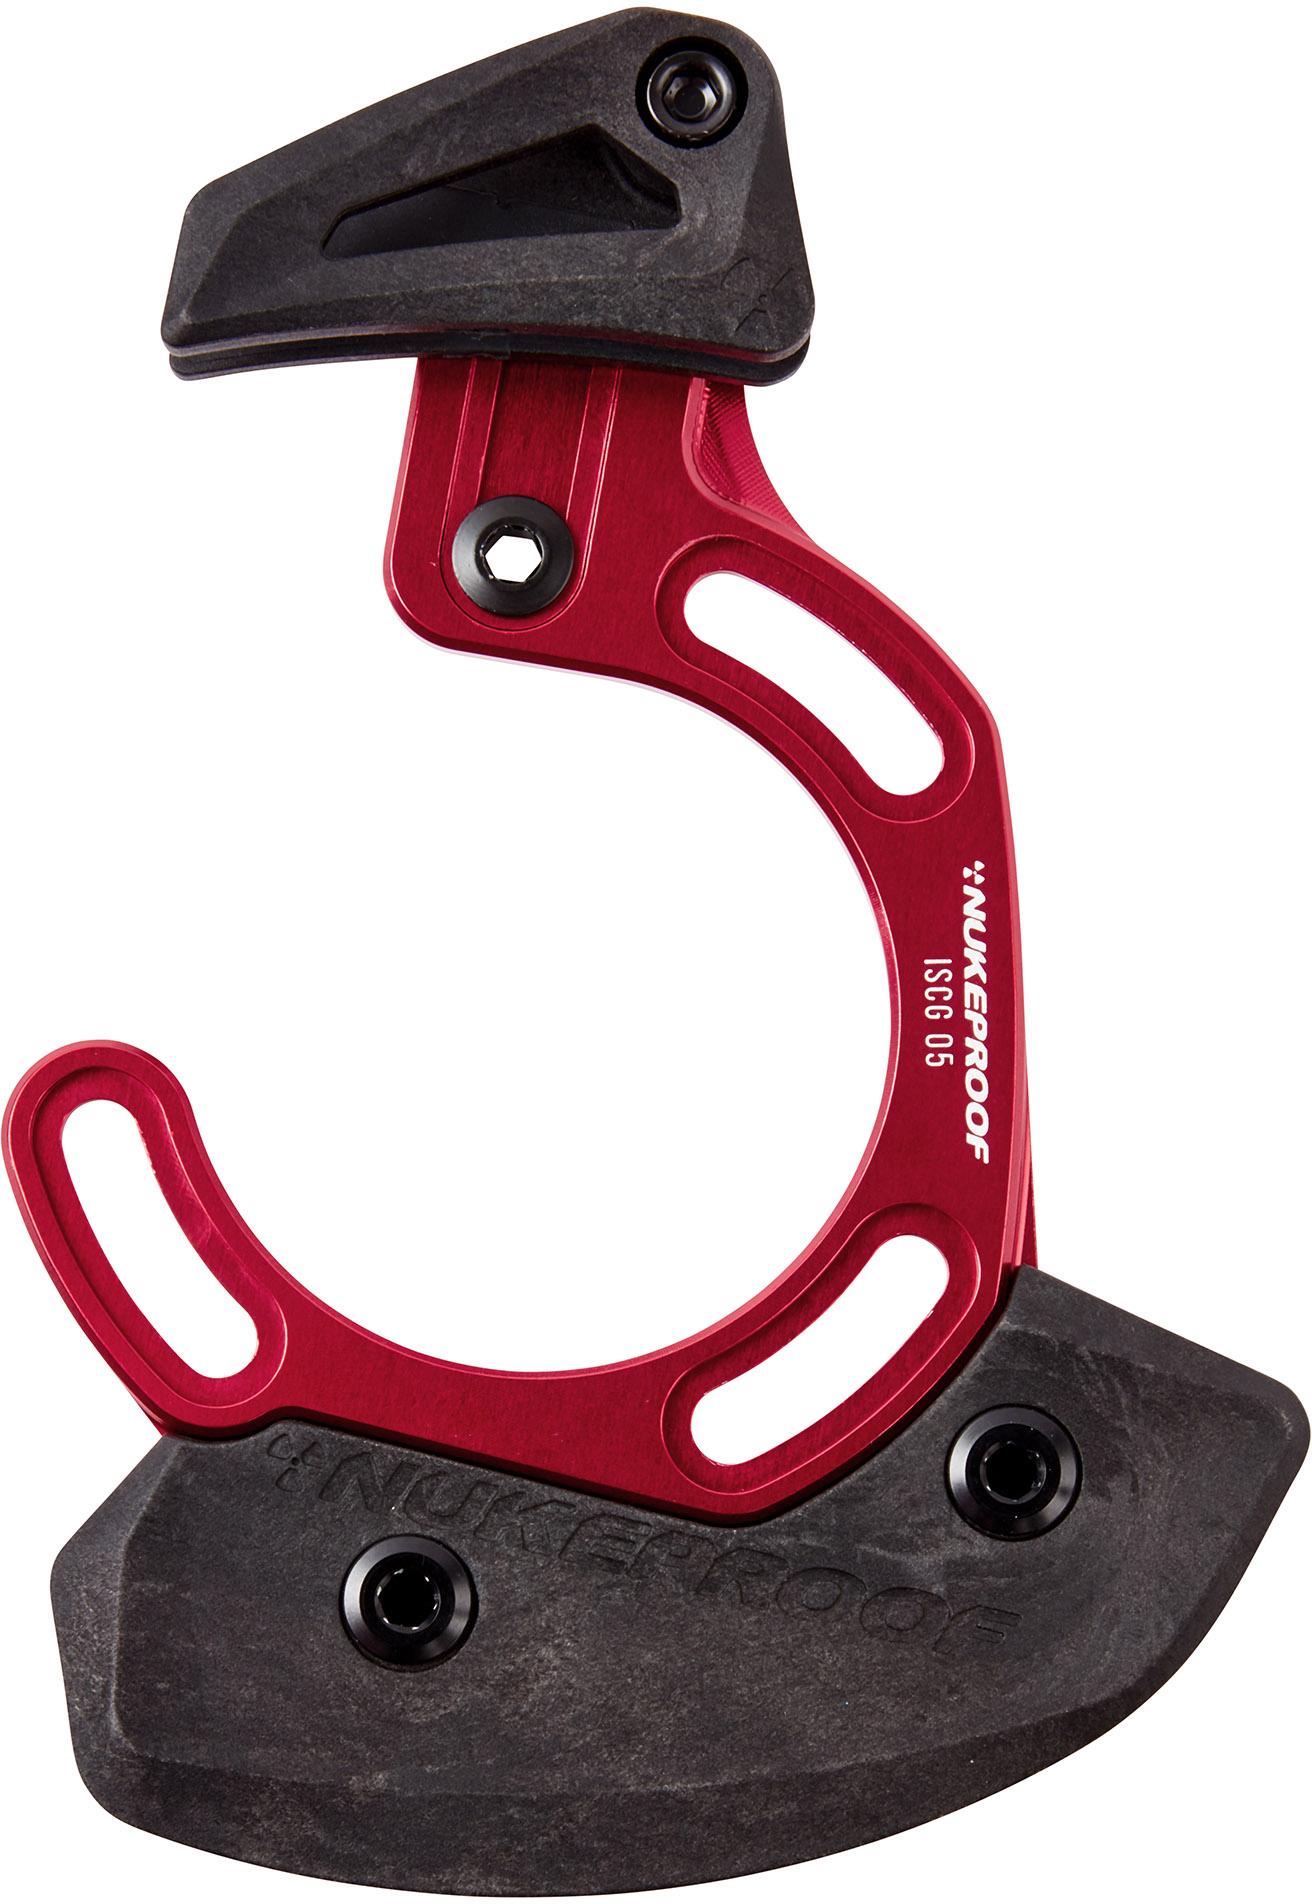 Nukeproof Chain Guide Iscg 05 Top Guide With Bash  Red -black